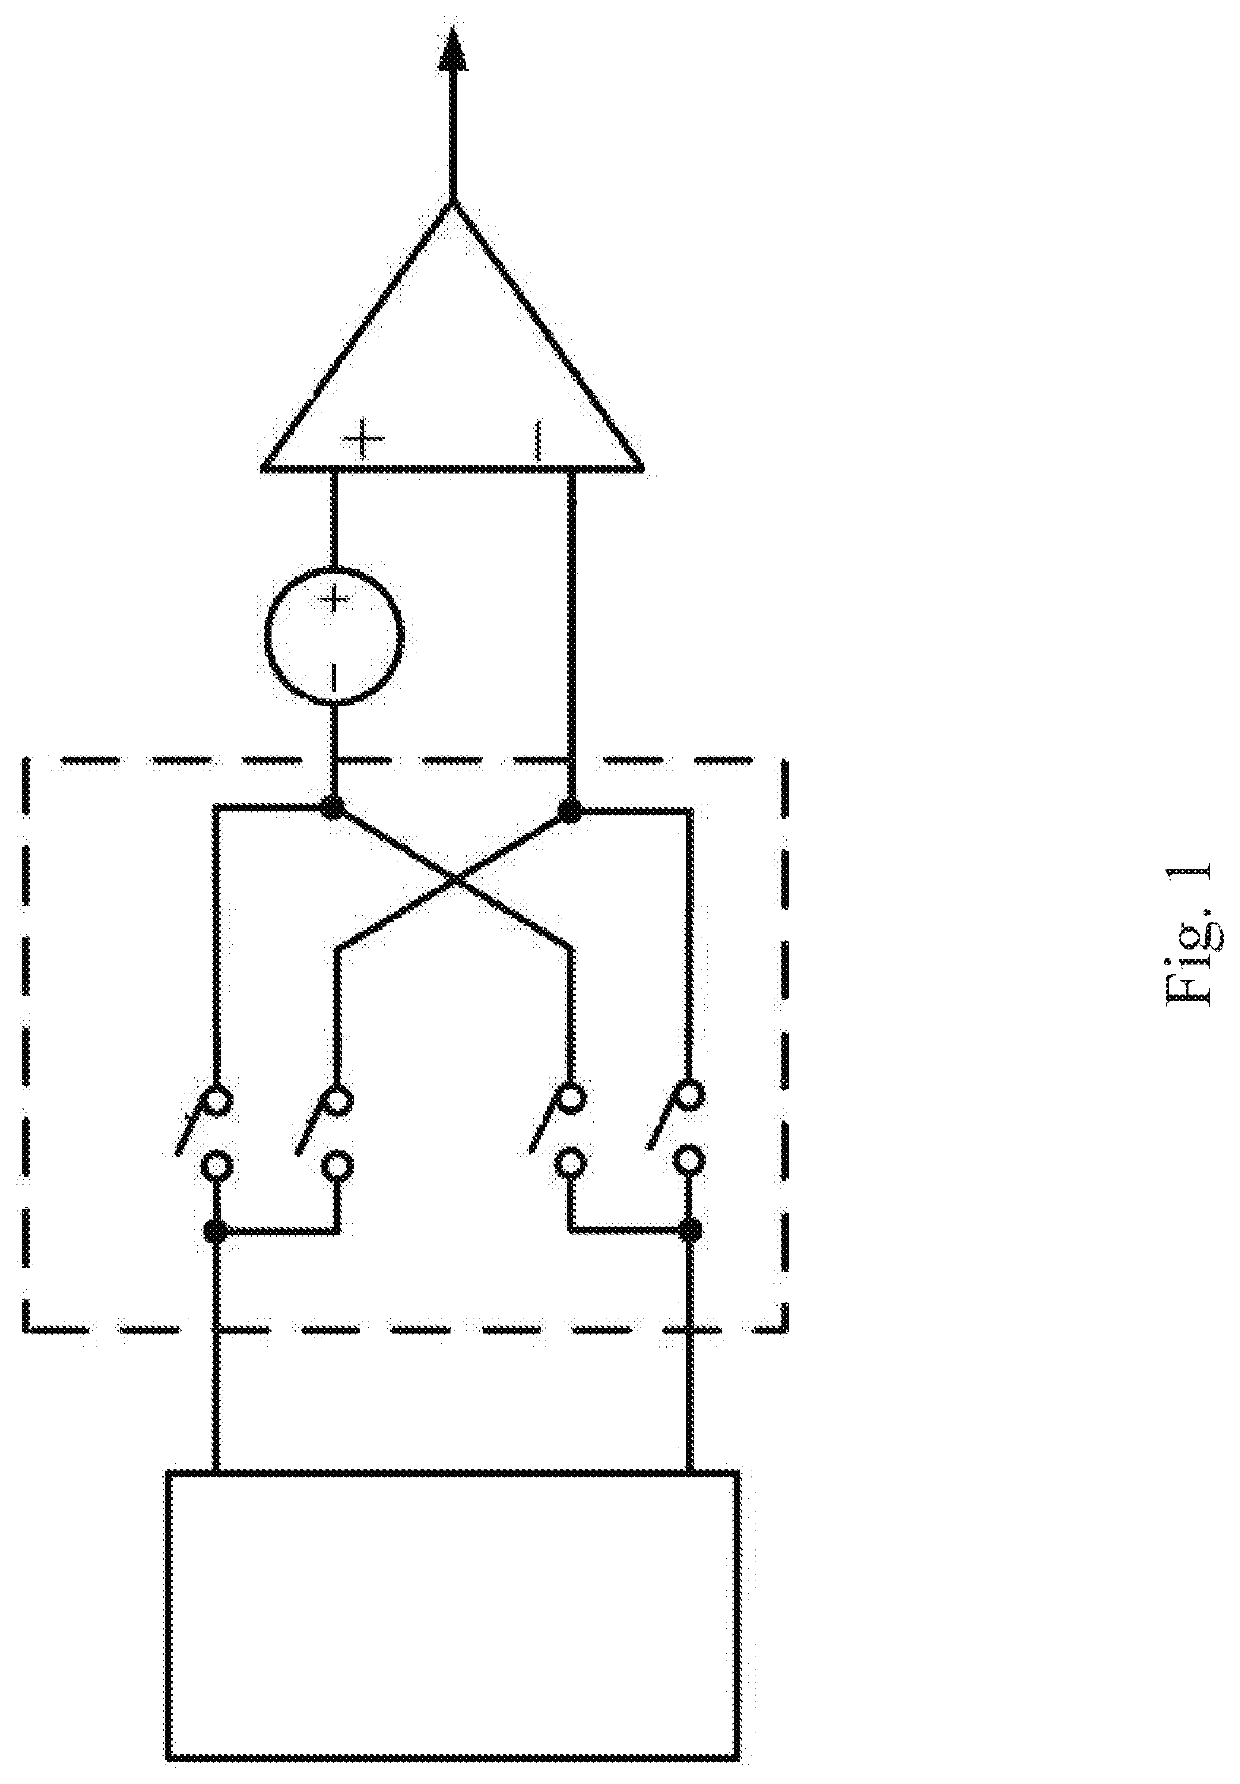 Bias switch circuit for compensating frontend offset of high accuracy measurement circuit